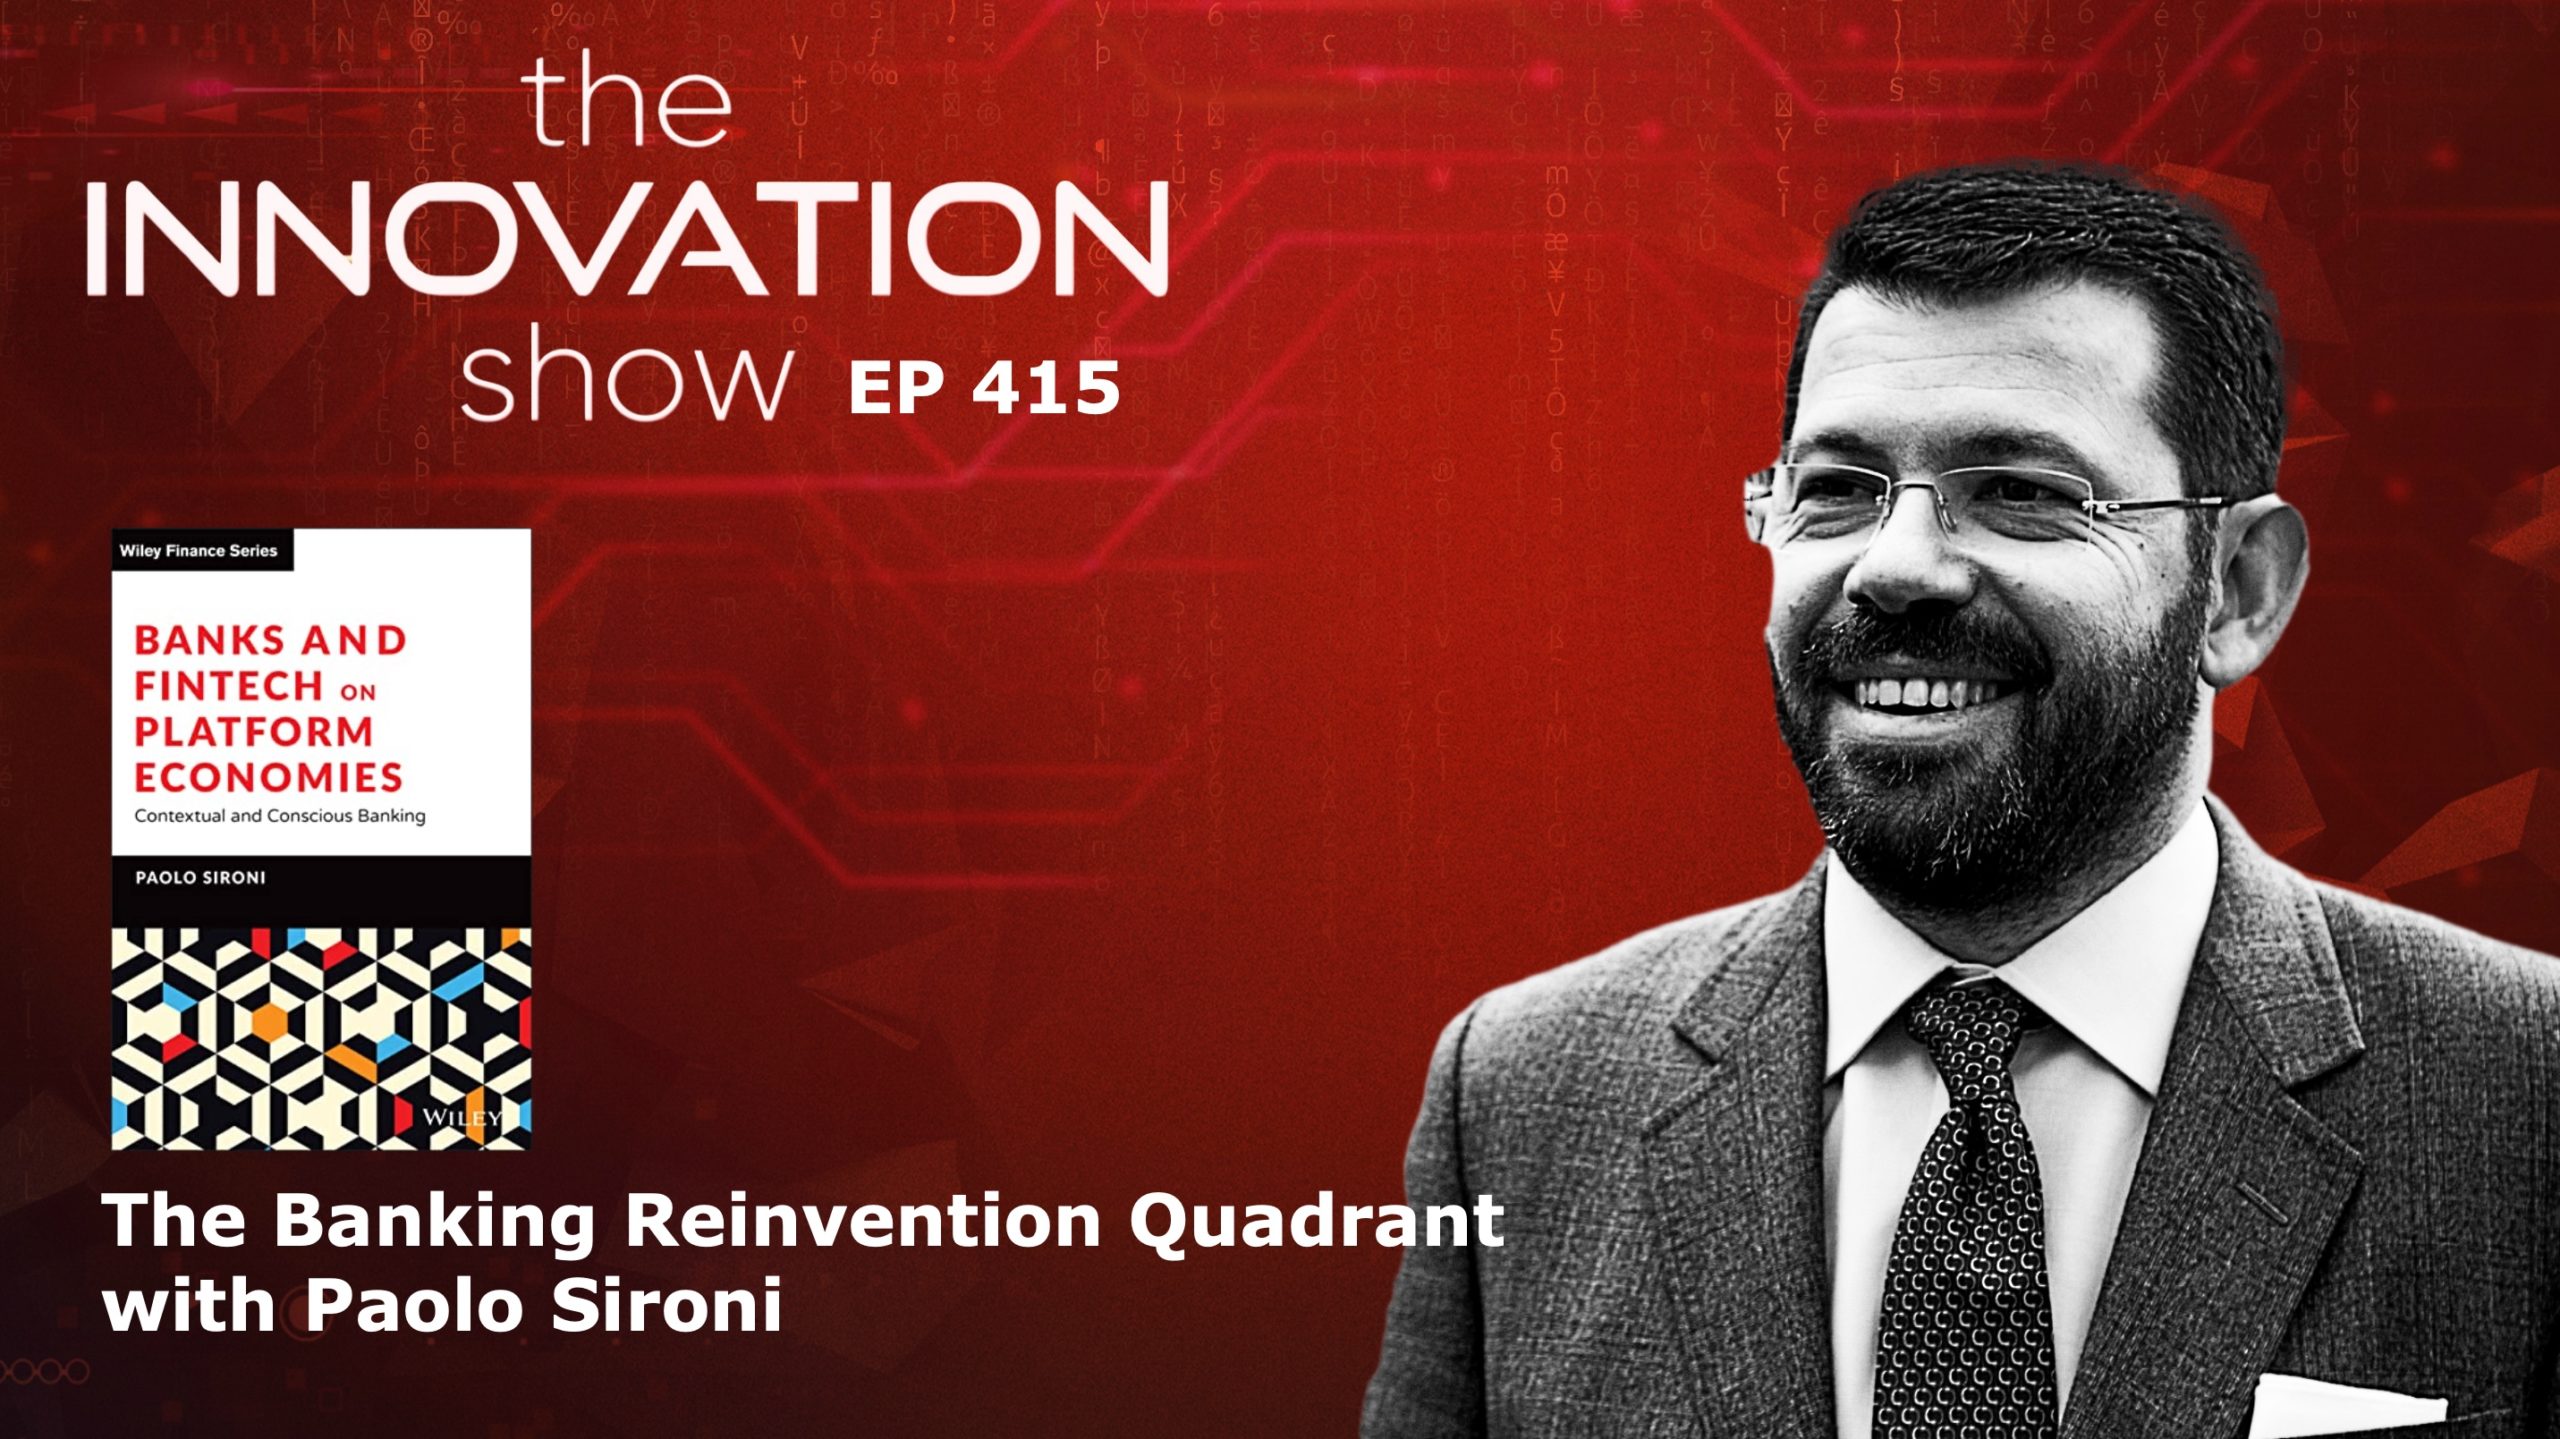 The Banking Reinvention Quadrant with Paolo Sironi